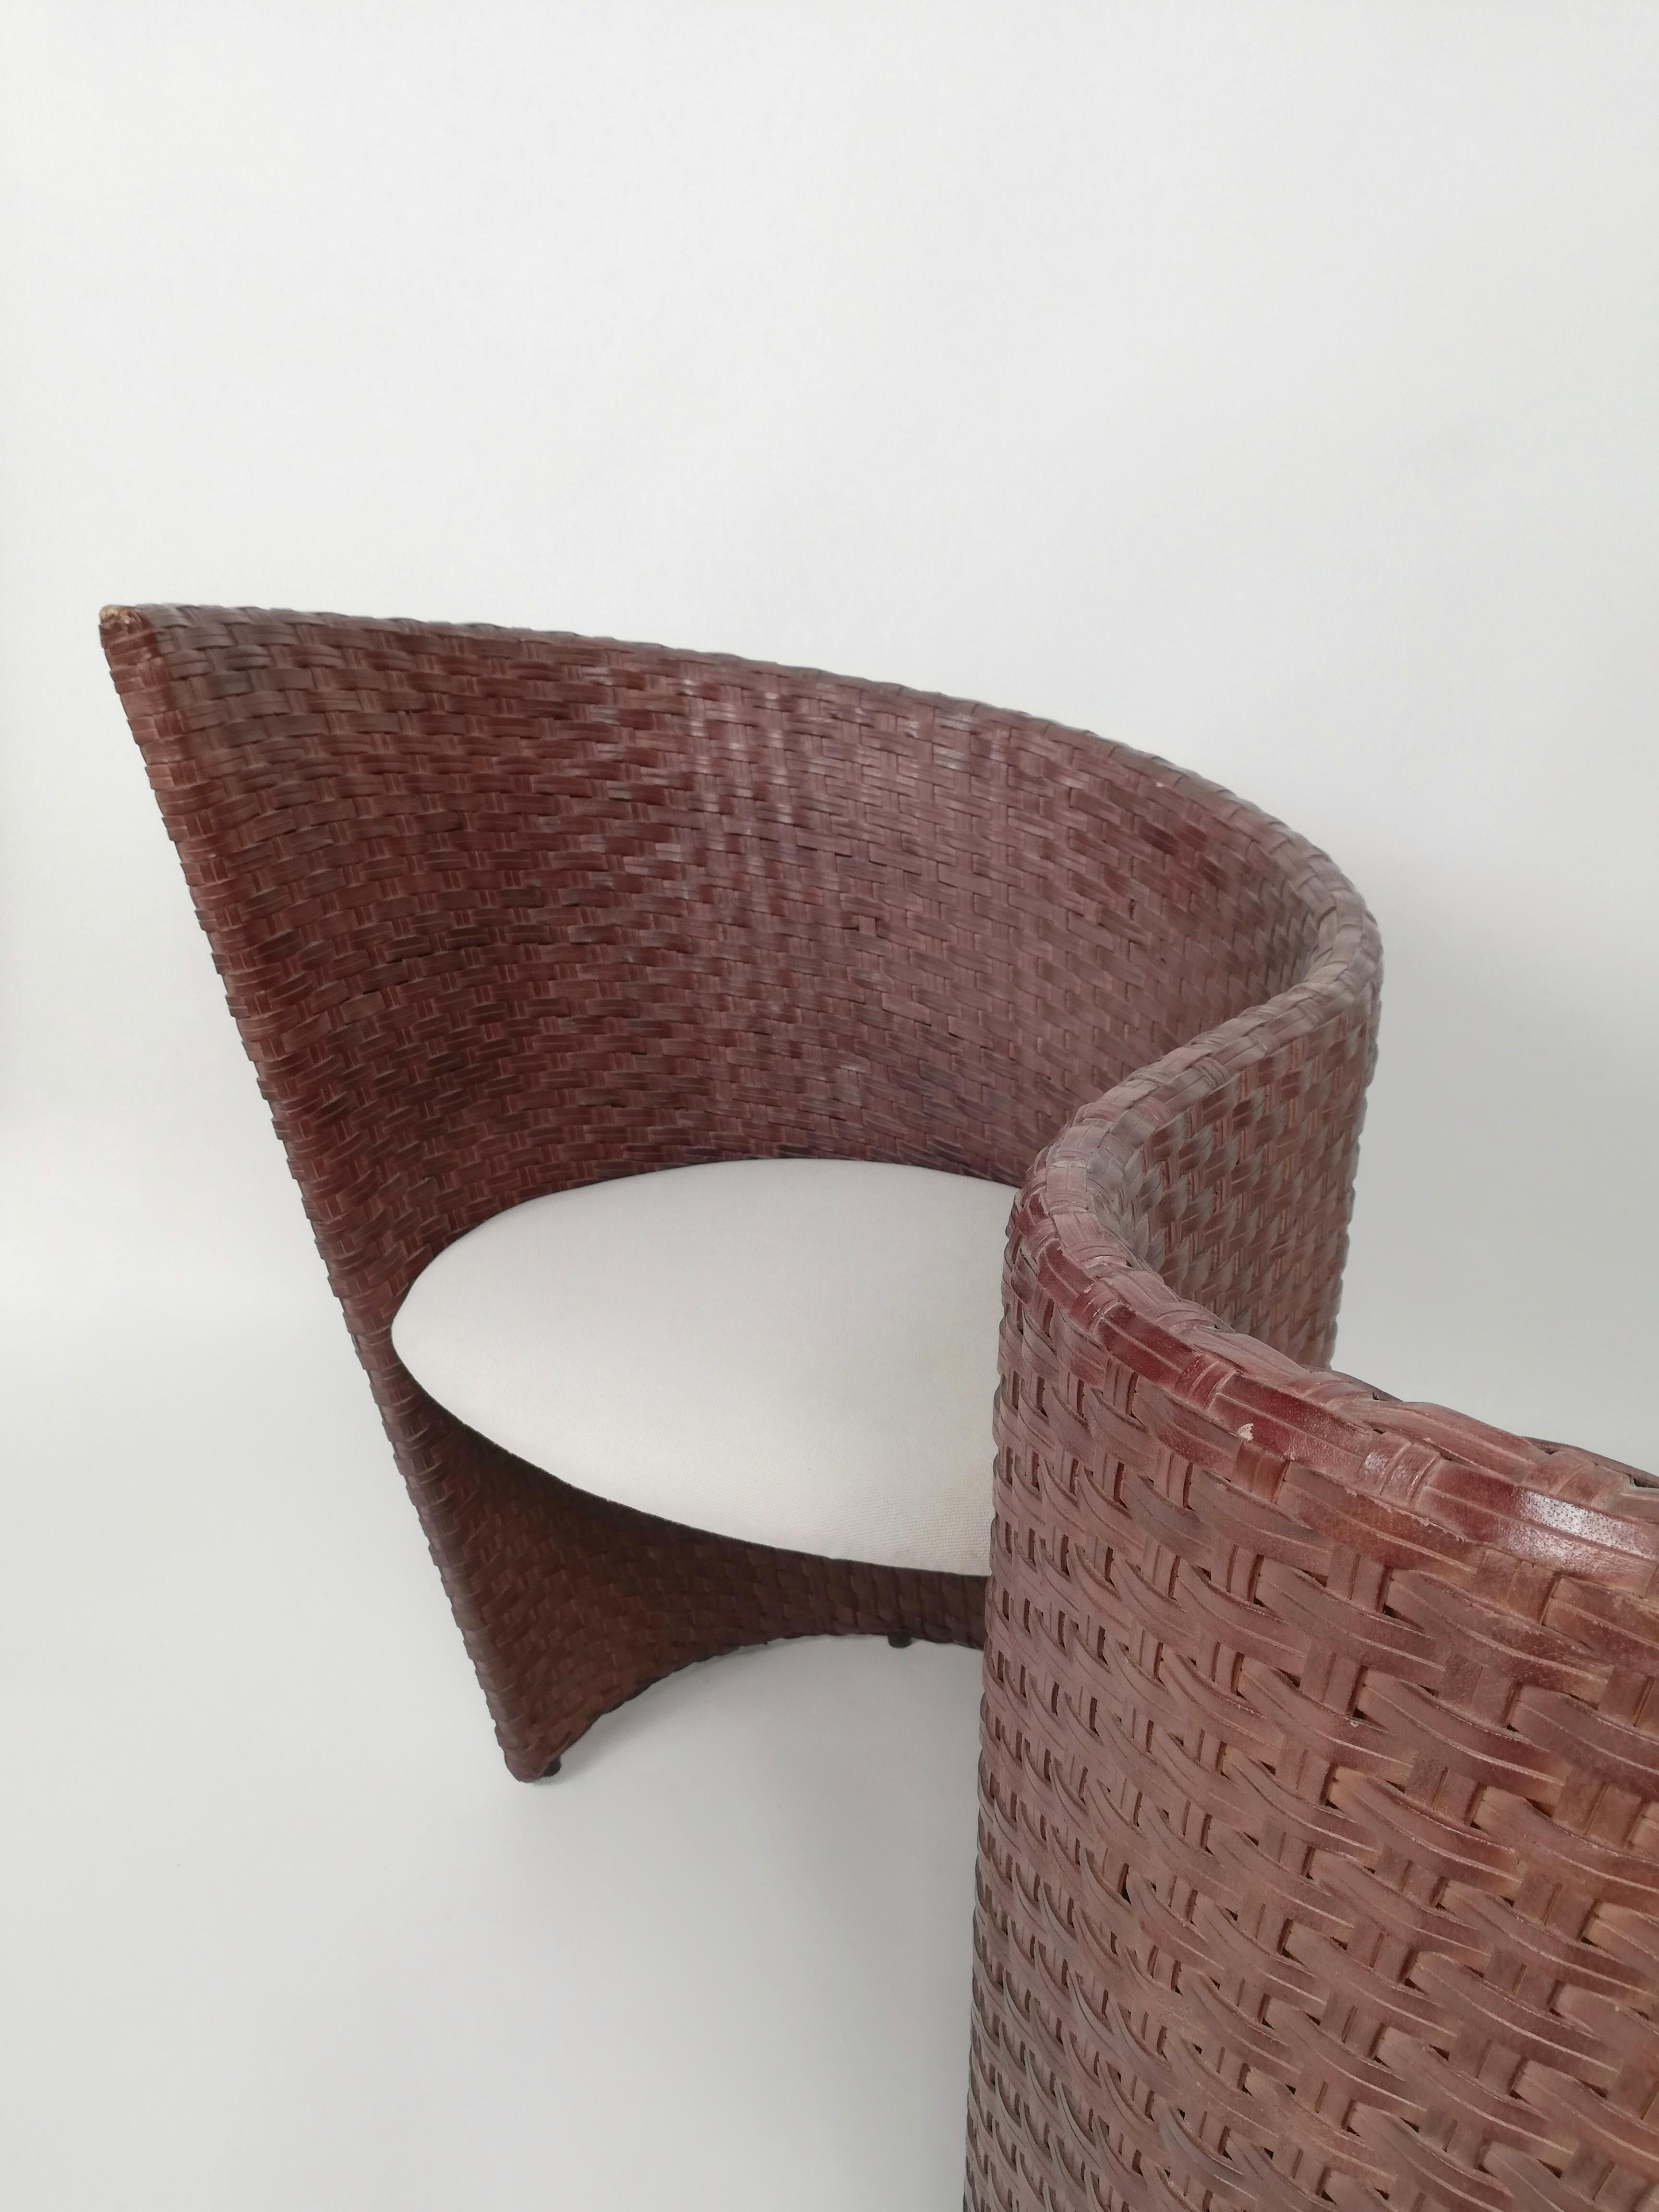 Post Modern Vis à Vis Sofa by Nico Devito in Hand-Woven, Leather Wood and Bamboo For Sale 4